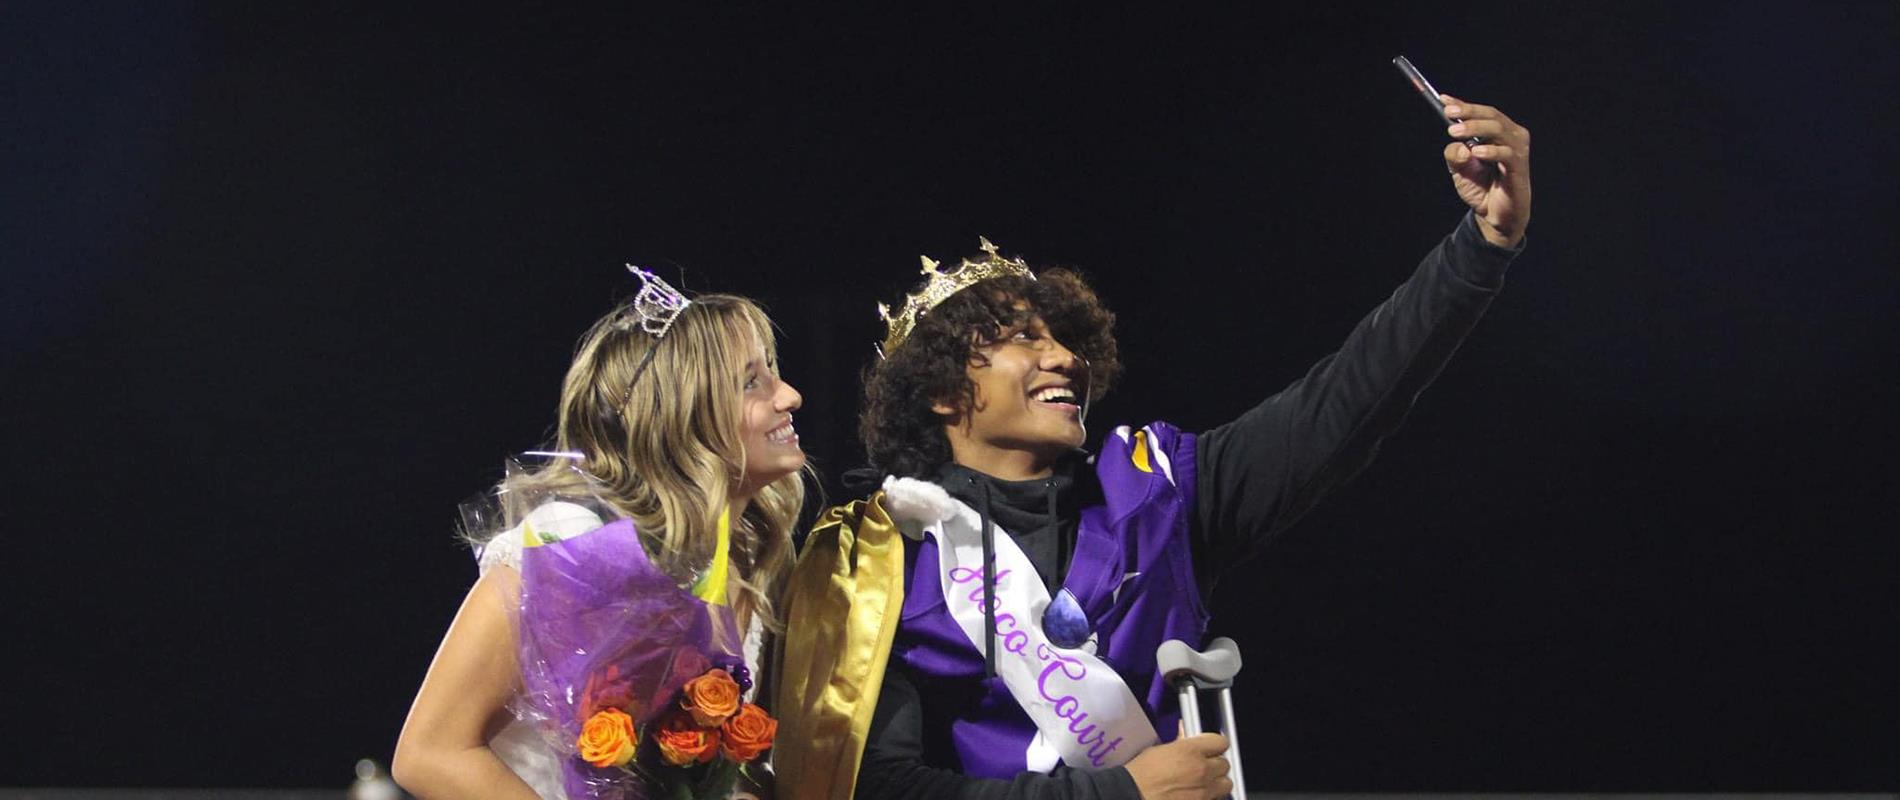 2022 LHHS Homecoming King and Queen taking a selfie